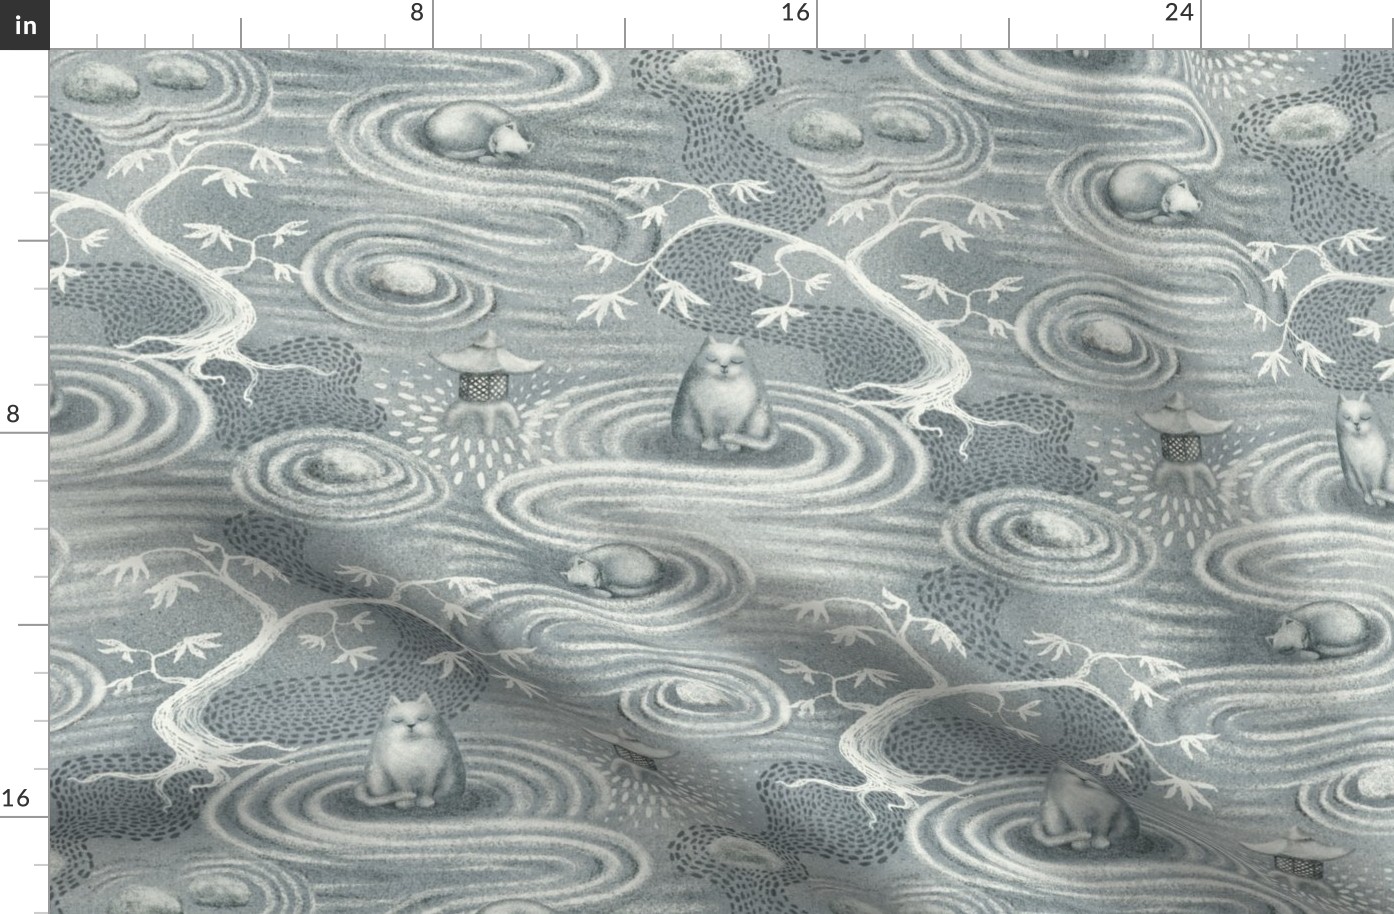 zen cats's garden wallpaper - silver grey and off-white - large scale